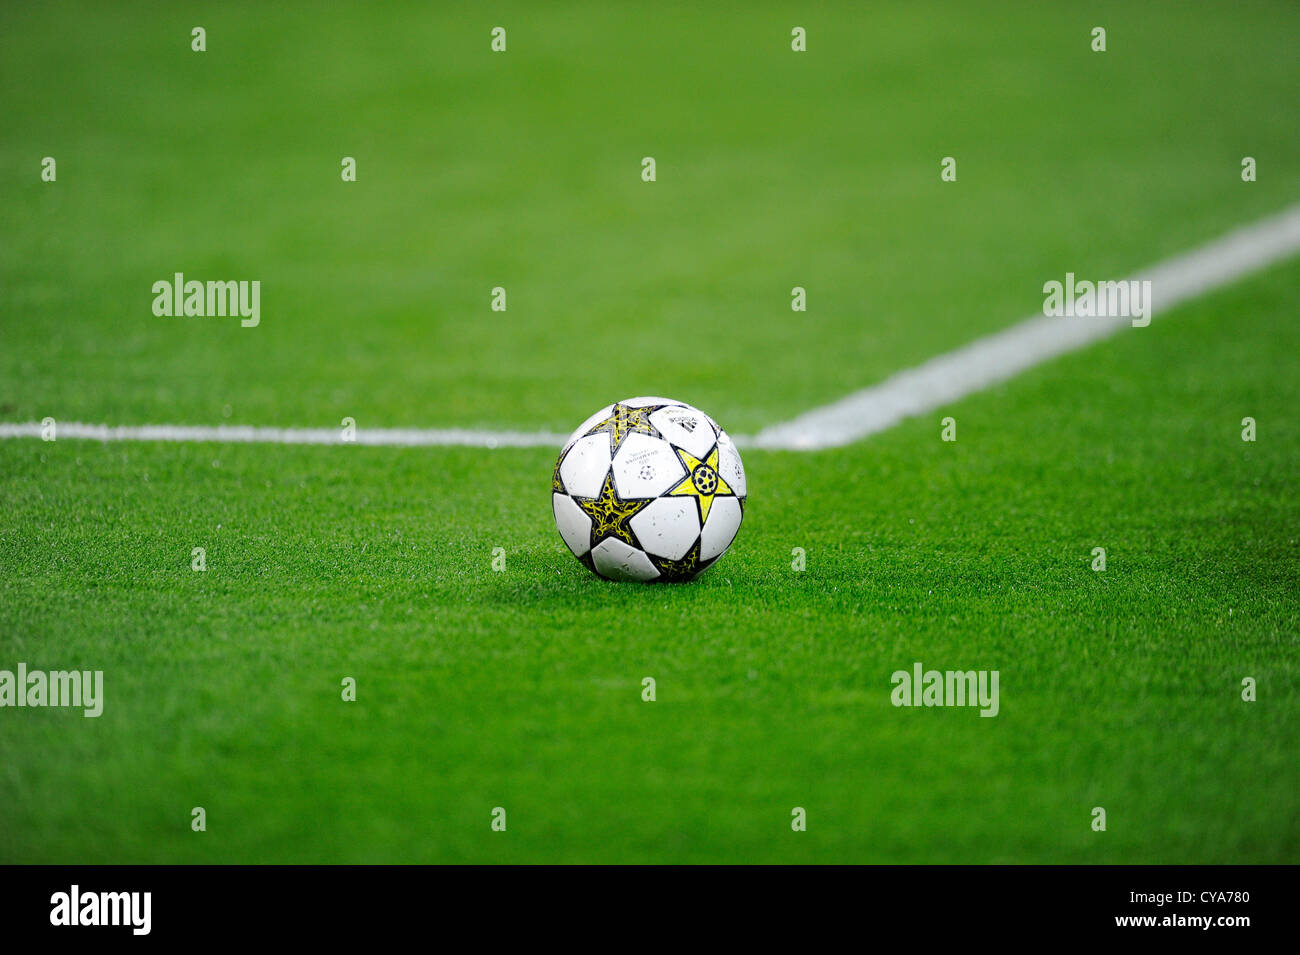 Champions League Ball 'Adidas Final 2013' on the football pitch Stock Photo